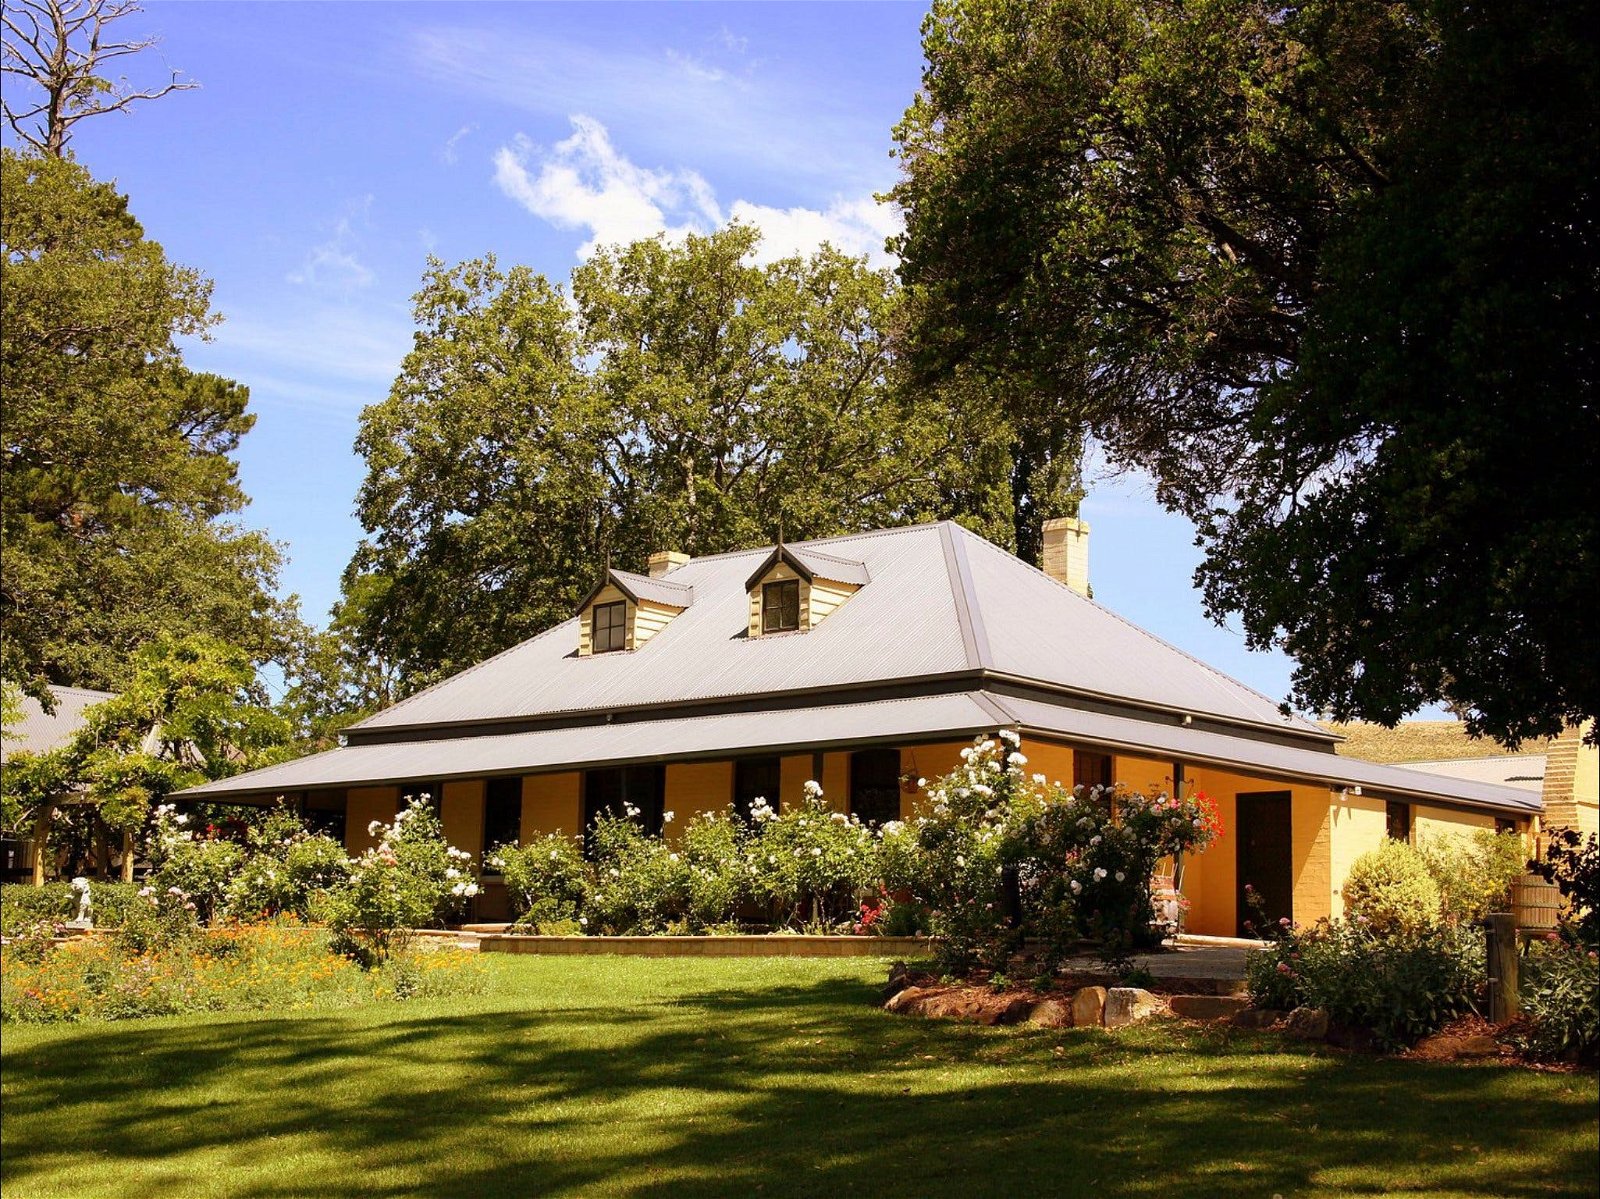 Eling Forest Cellar Door and Cafe - Broome Tourism